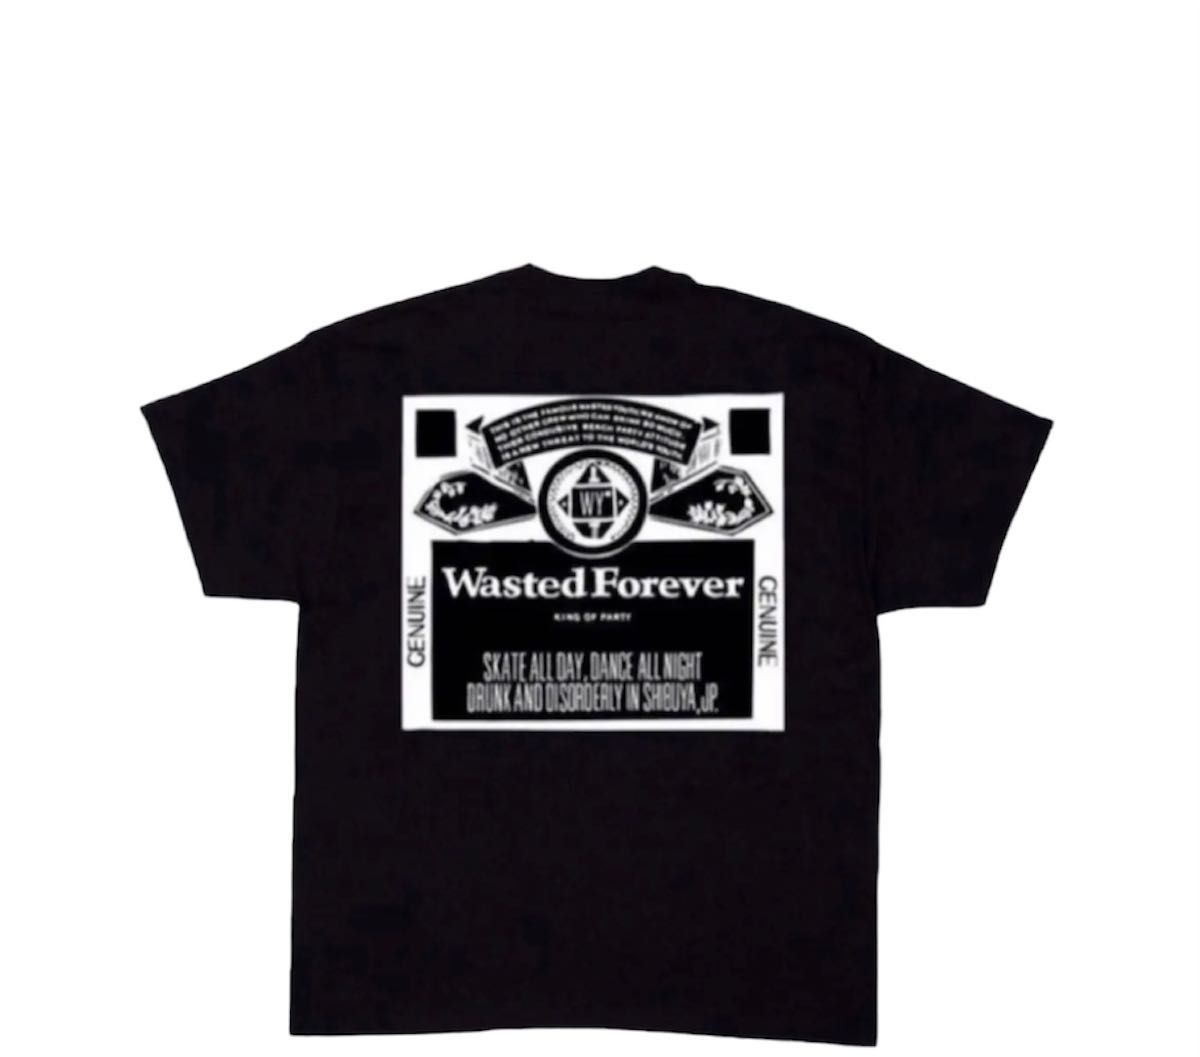 WASTED FOREVER Tee Black Lサイズ｜Yahoo!フリマ（旧PayPayフリマ）